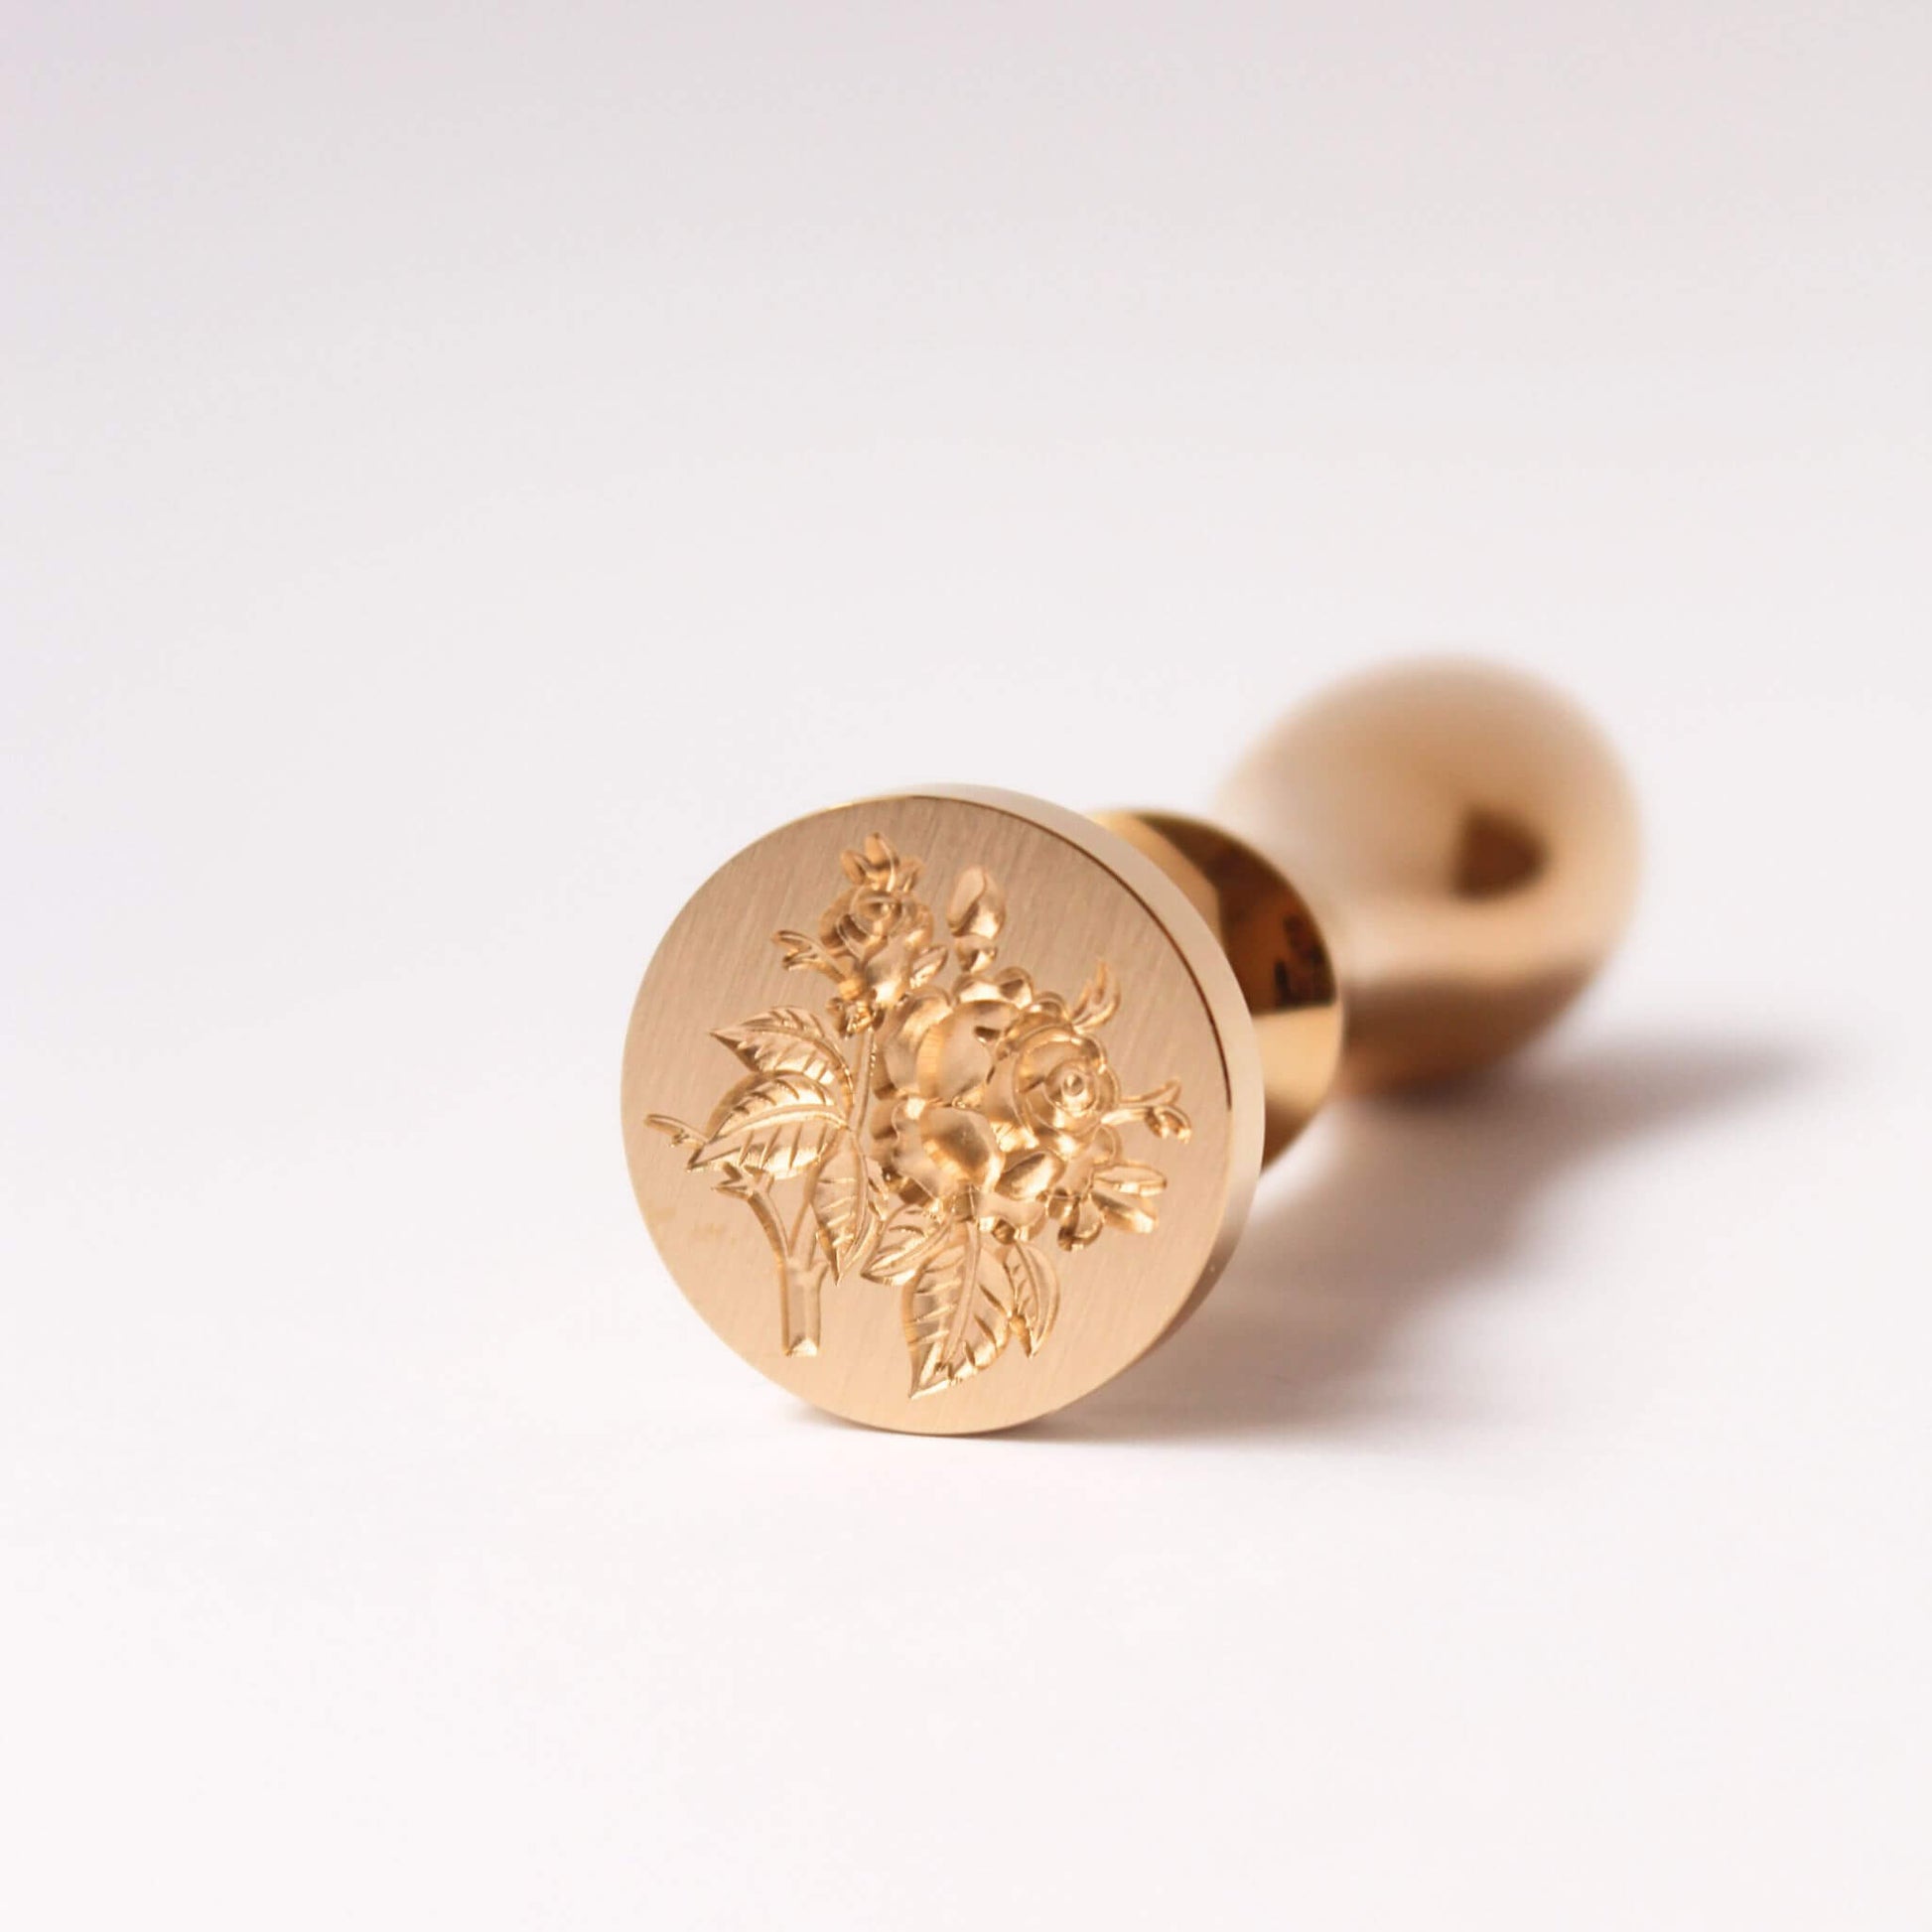 Solid brass wax seal with highly detailed engraving of a vintage style rose on round brass wax seal head